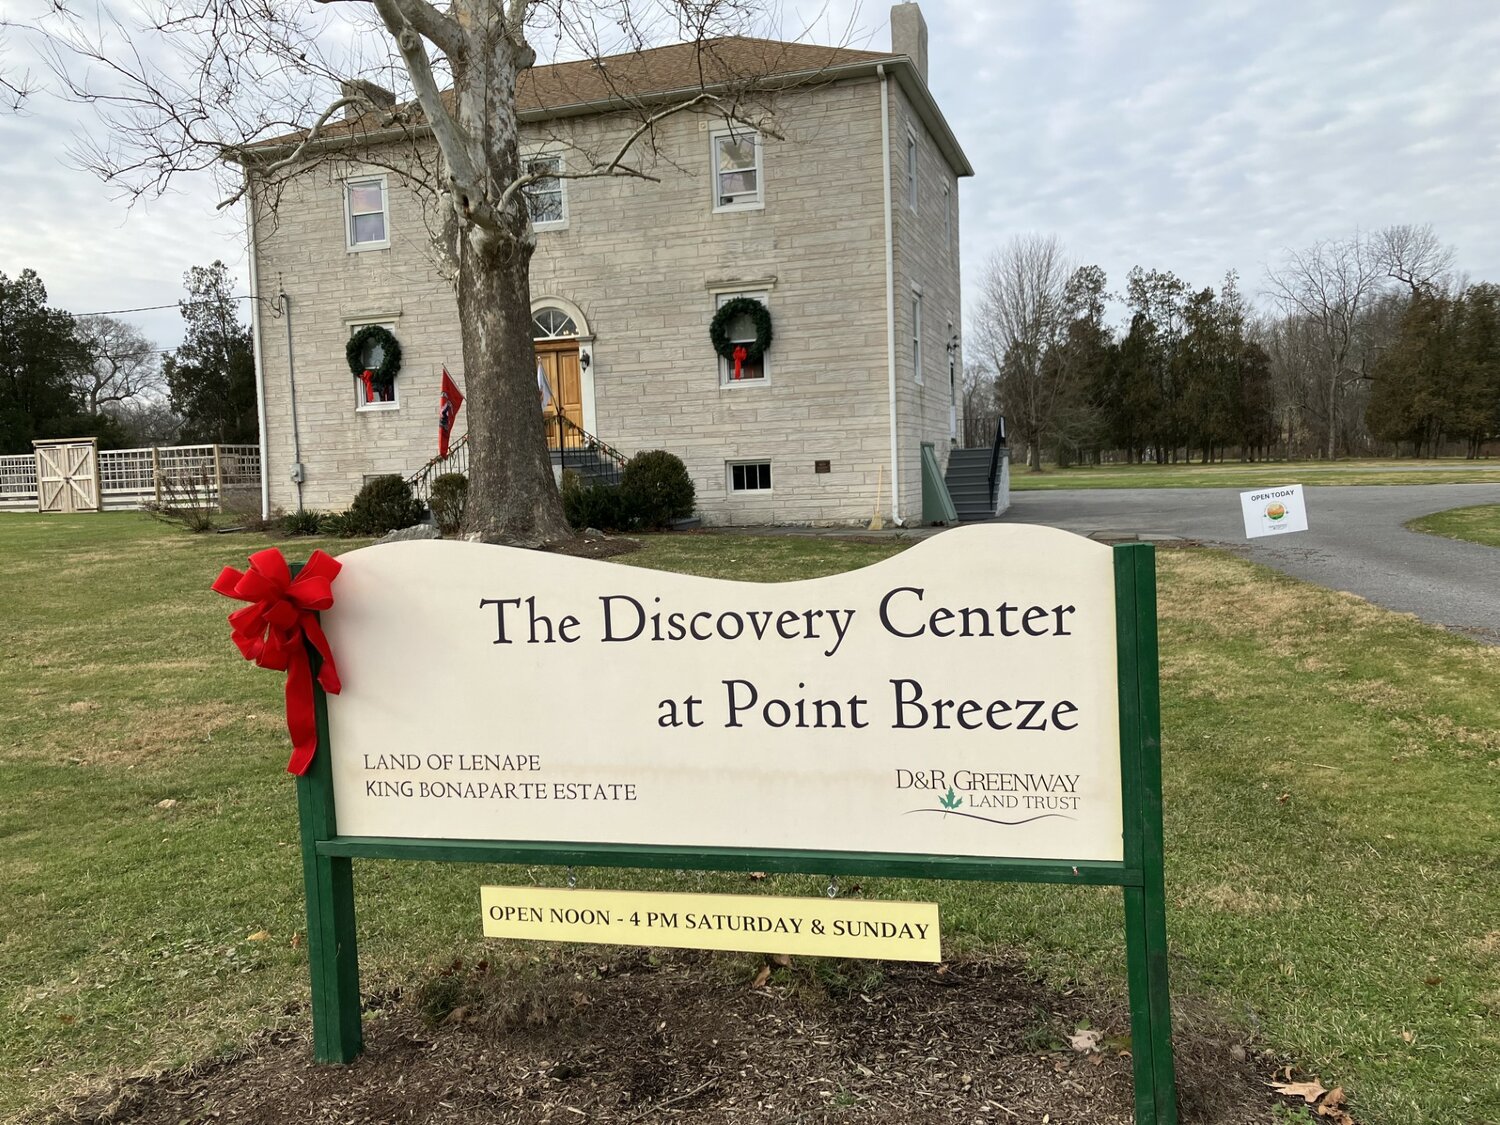 The Discovery Center at Point Breeze.